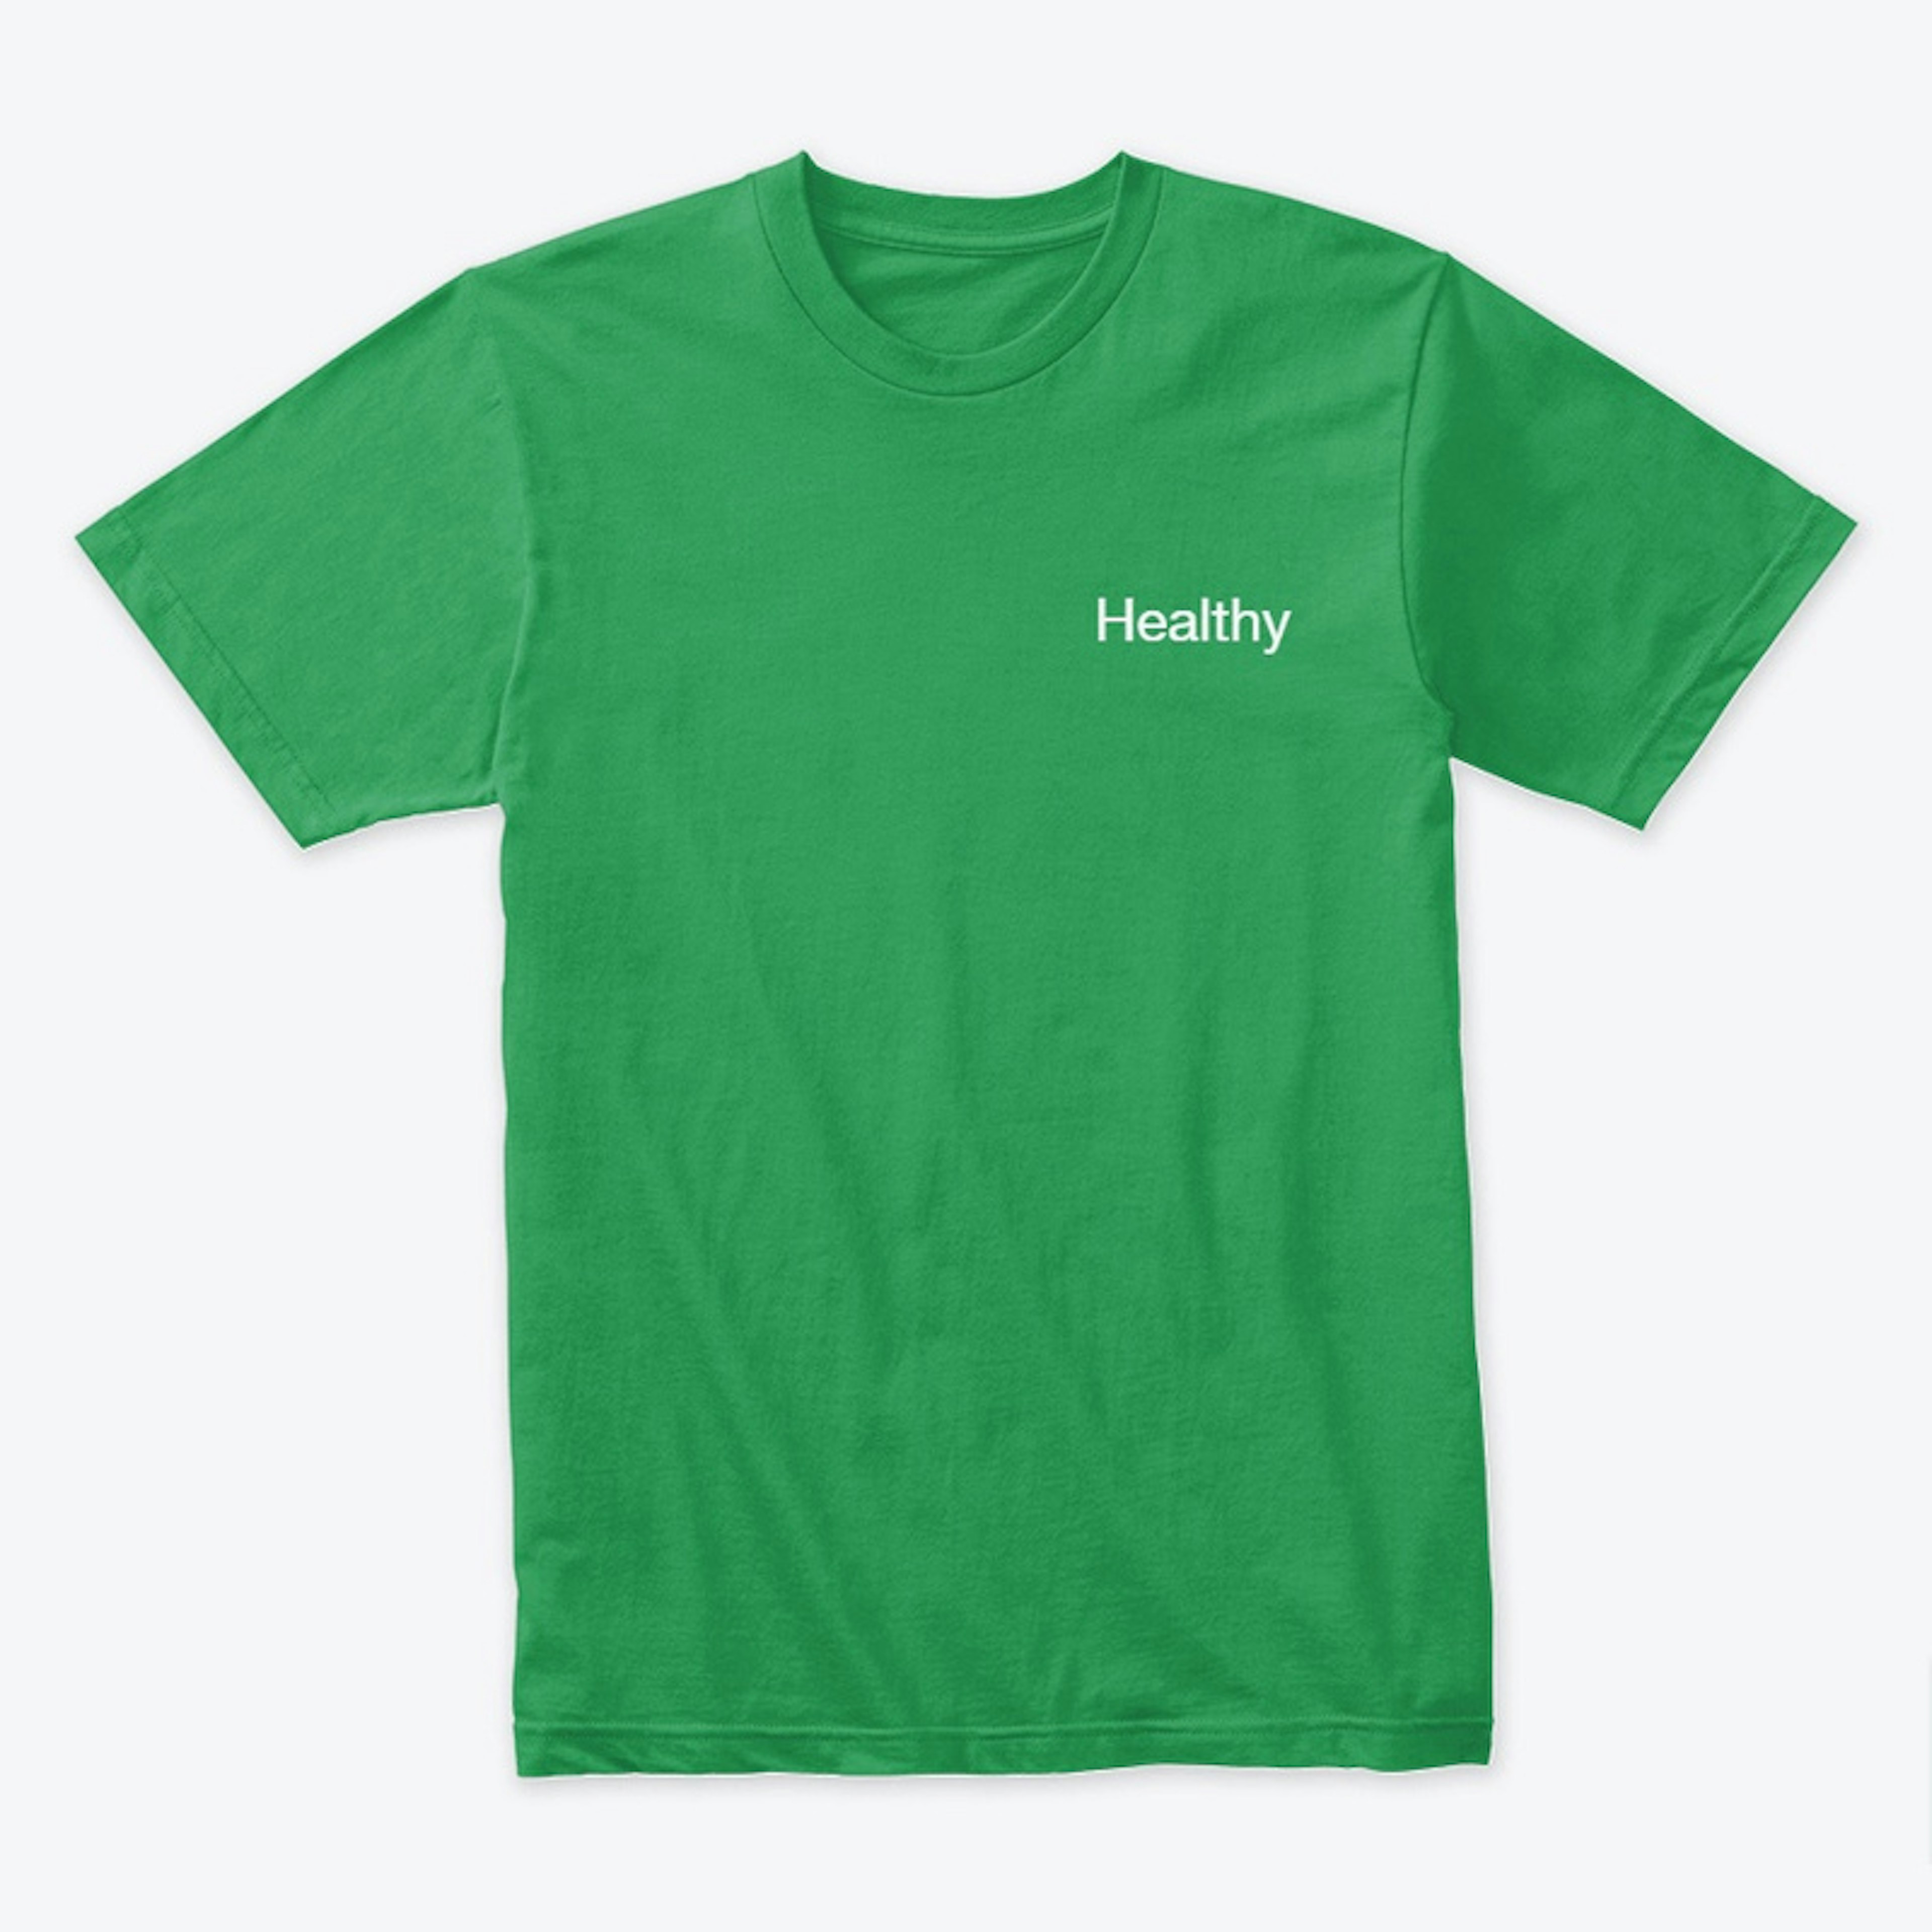 New colection "Healthy"